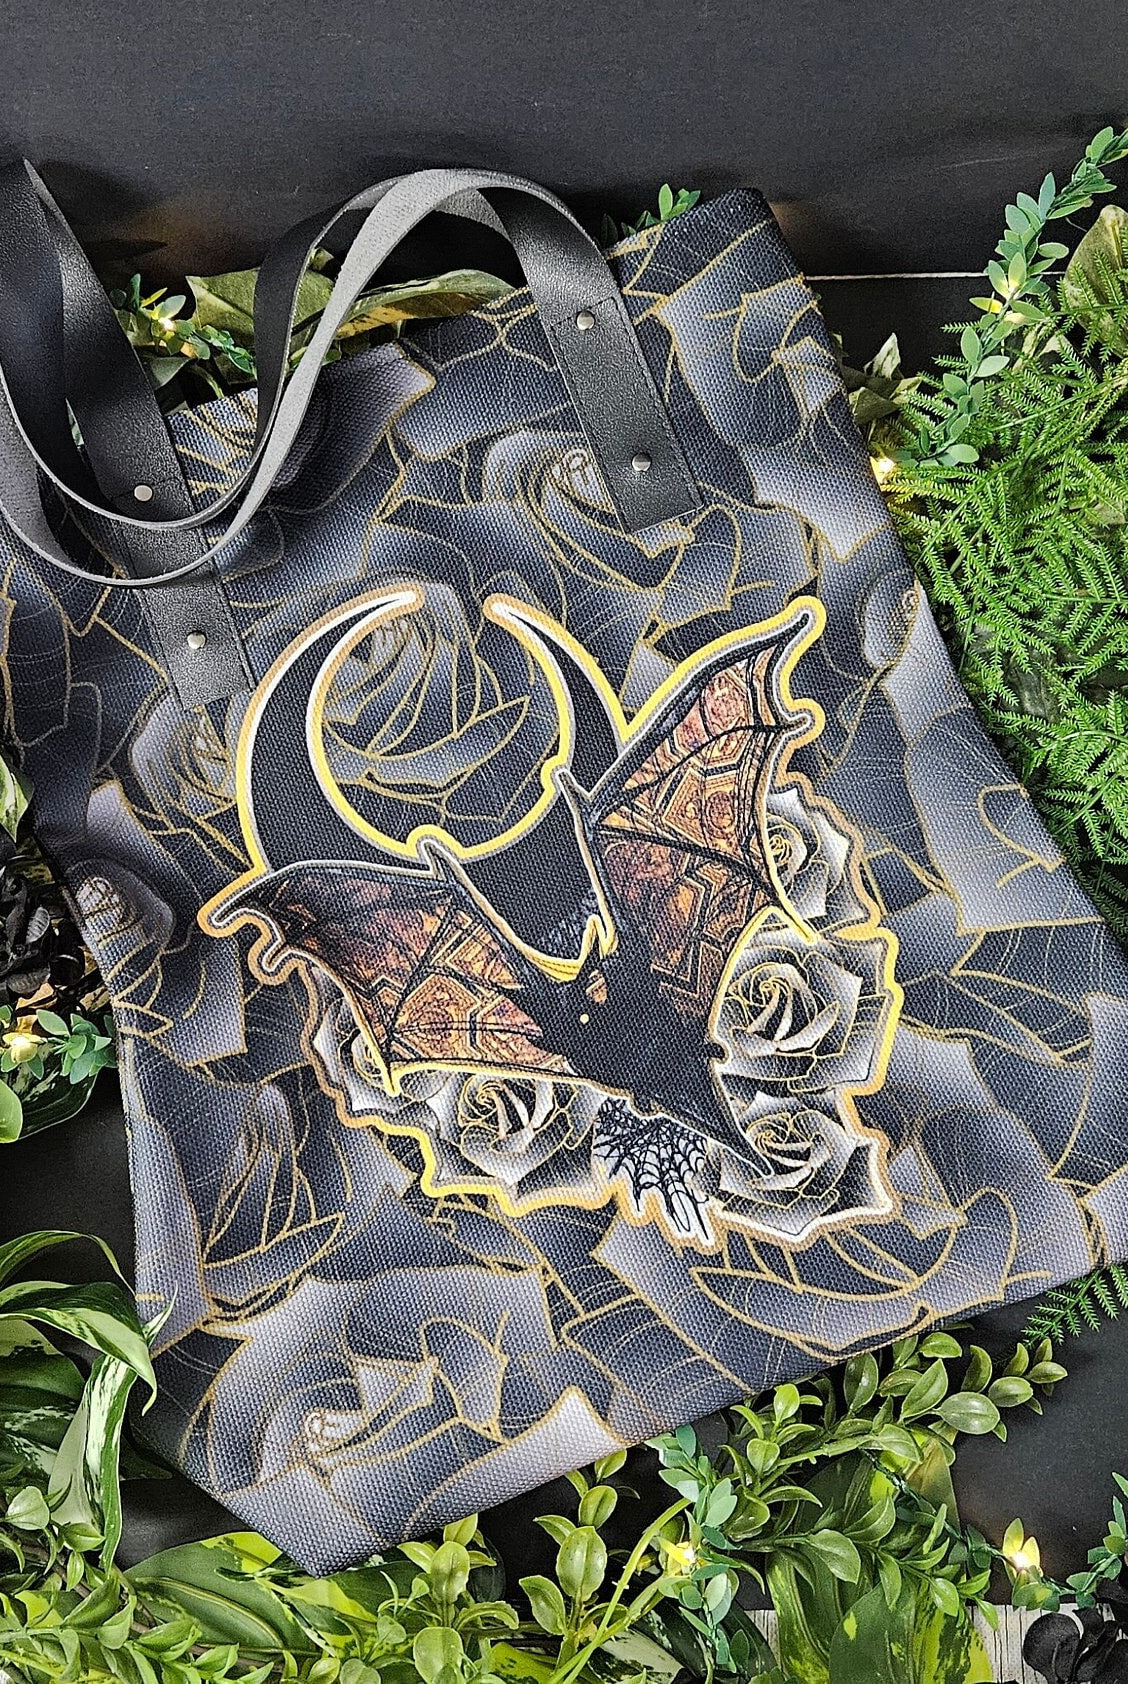 TOTE BAG : The Florence Bat with Black Moon Bag with Vegan Leather Straps and Magnetic Closure